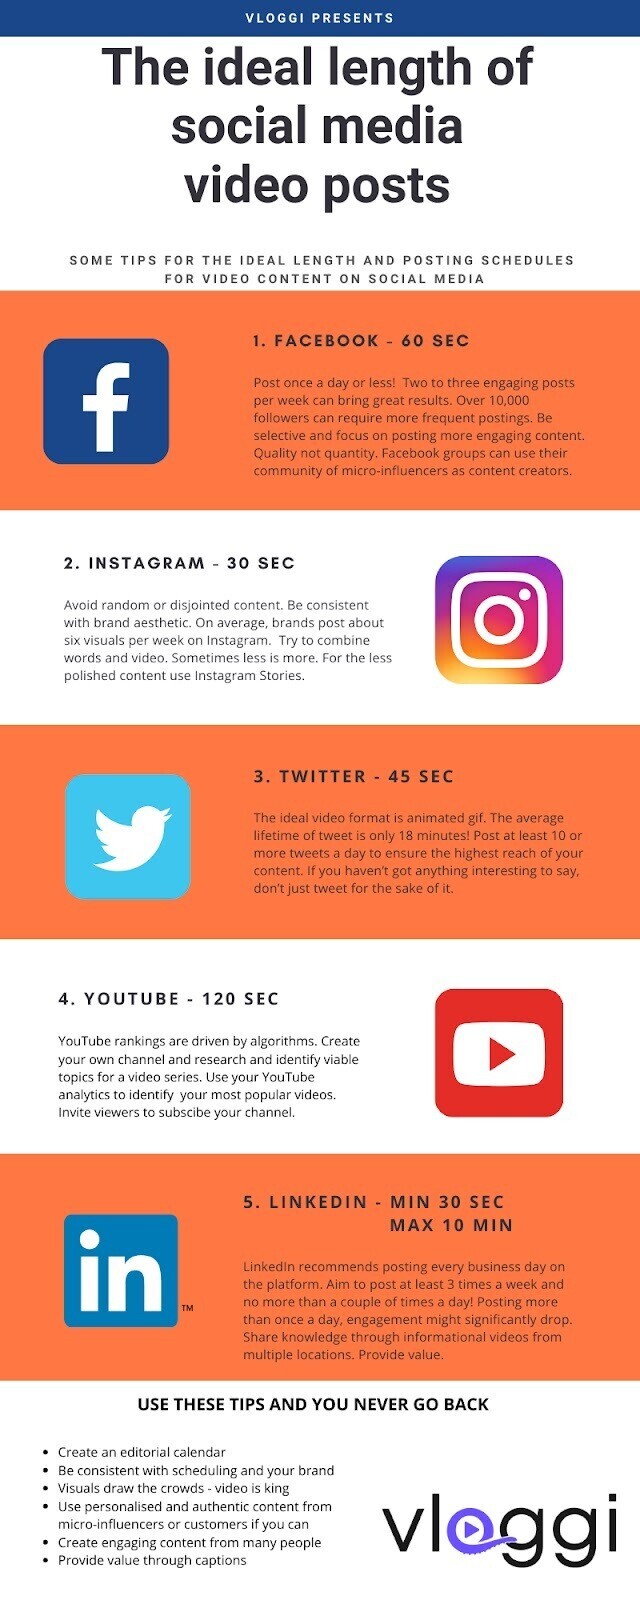 "The ideal length of social media video posts" infographic